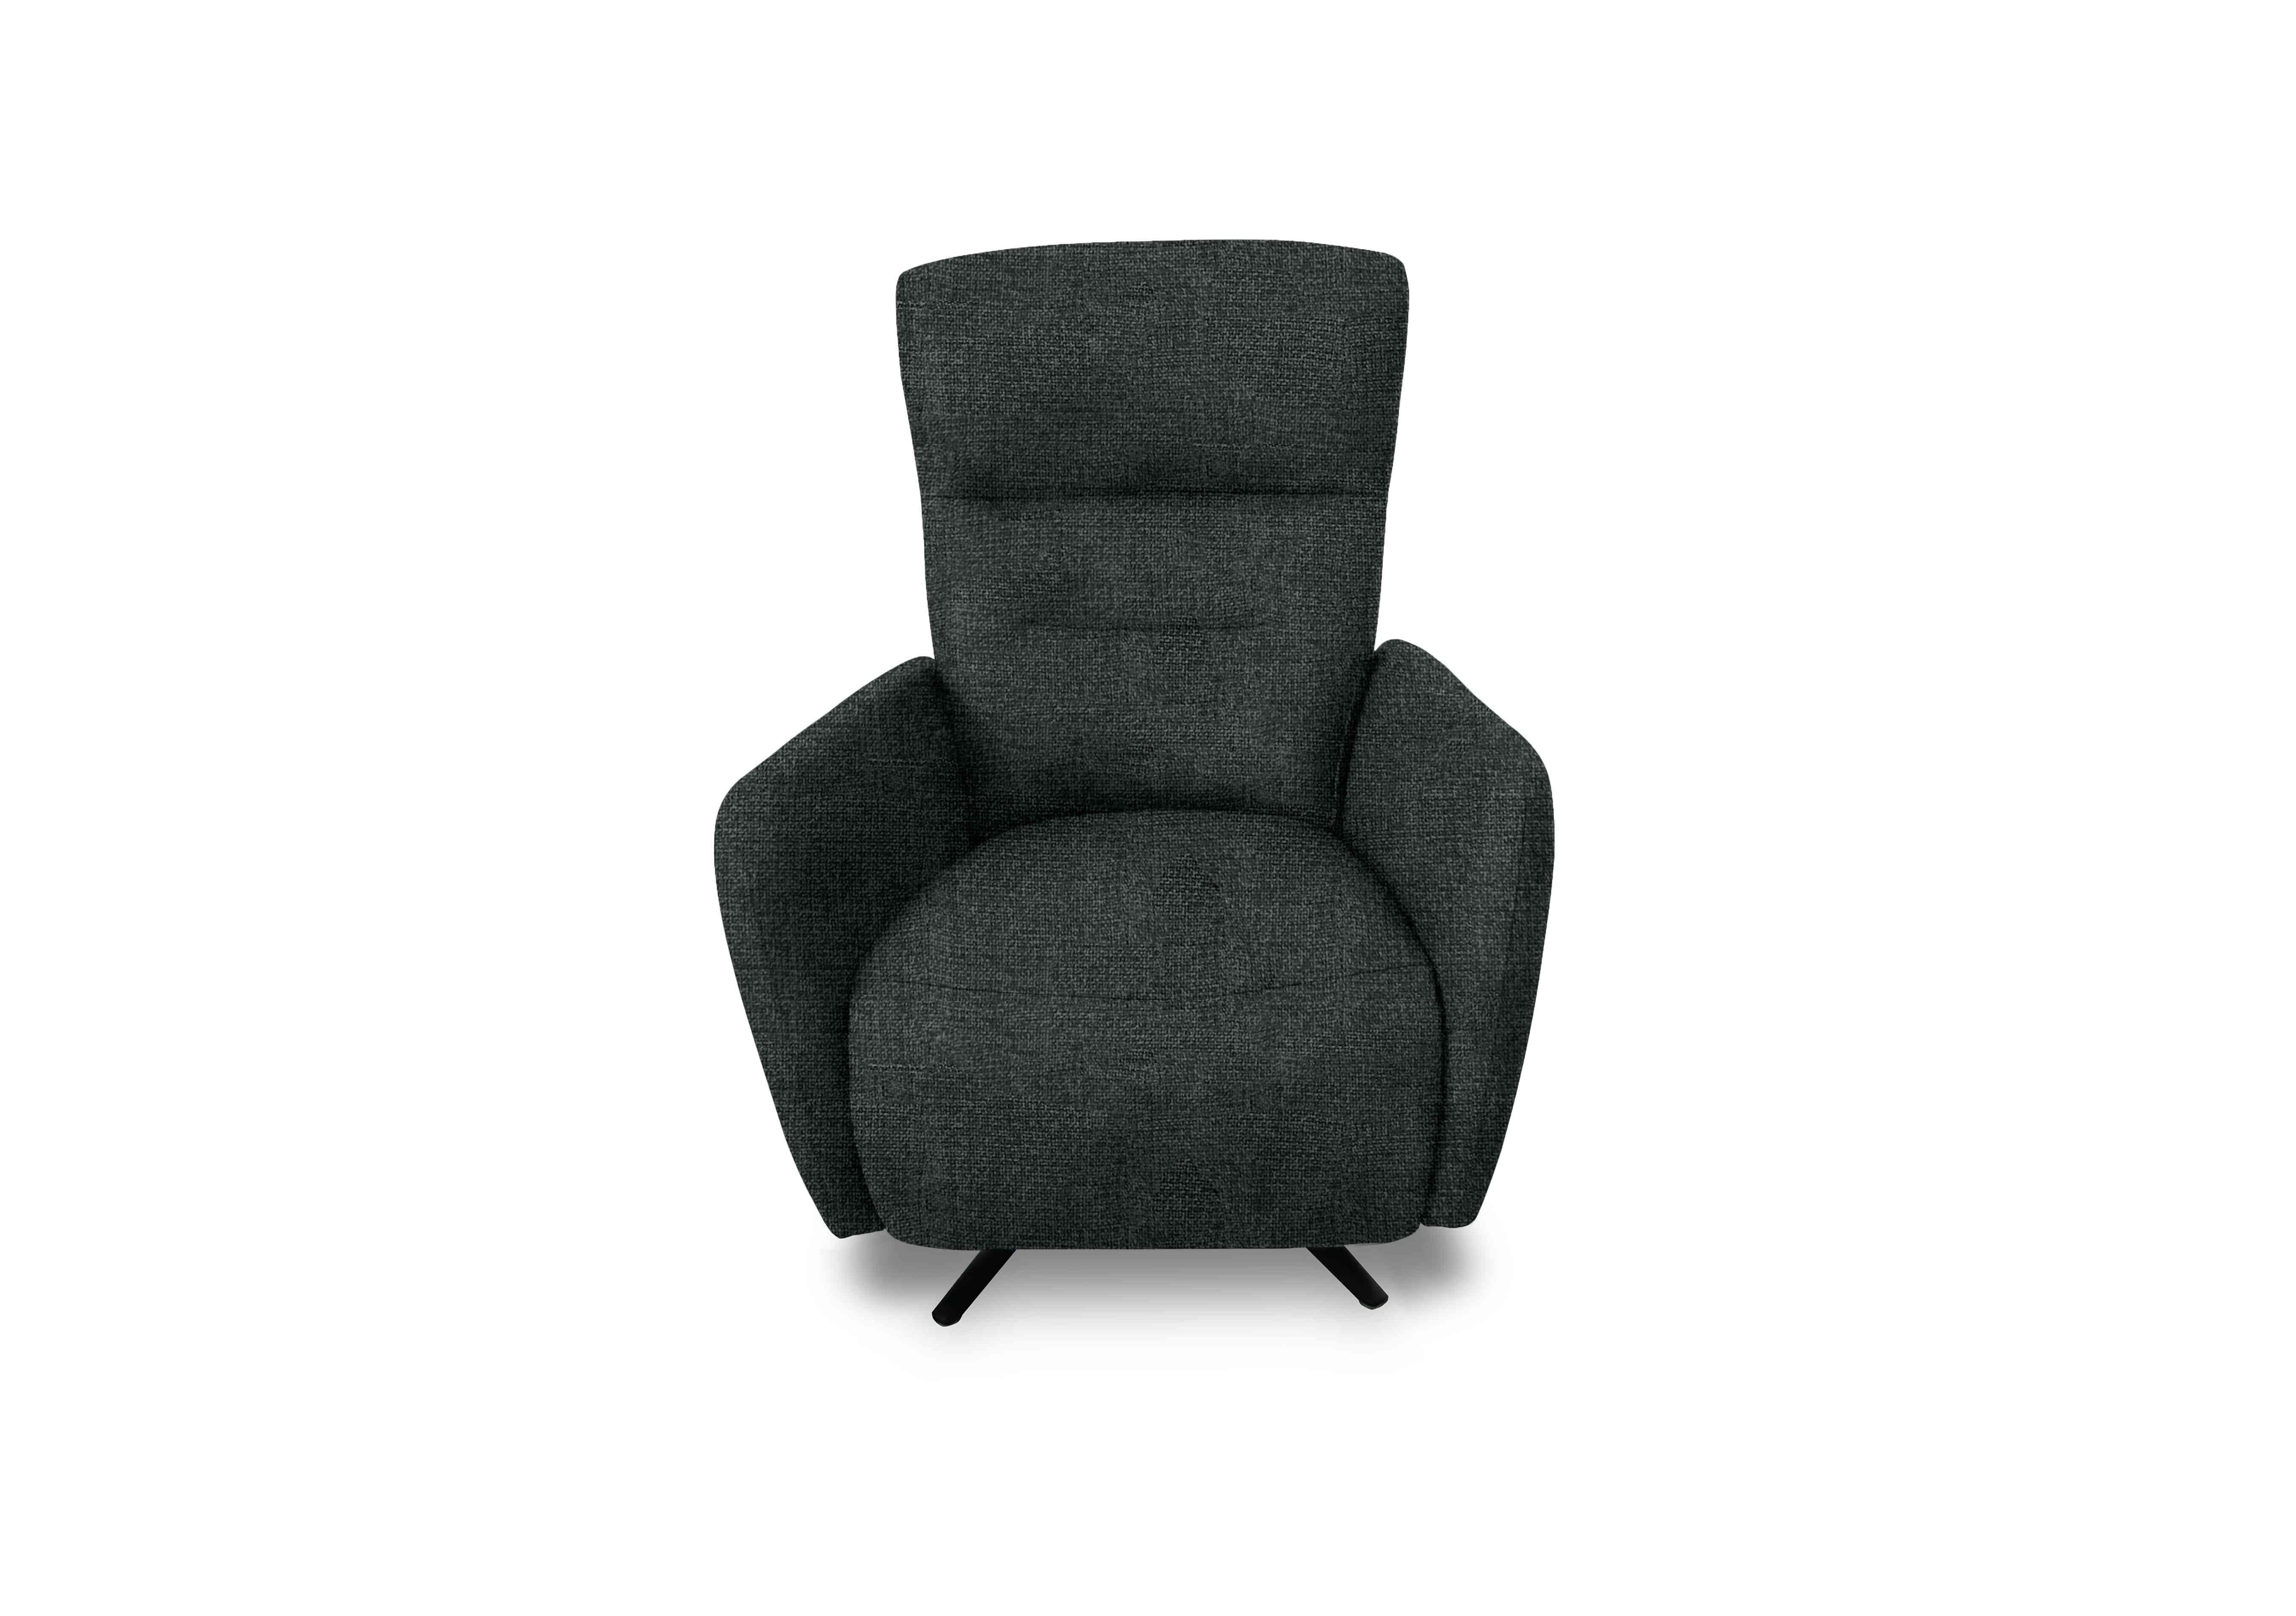 Designer Chair Collection Le Mans Fabric Dual Power Recliner Swivel Chair in Fab-Cac-R463 Black Mica on Furniture Village